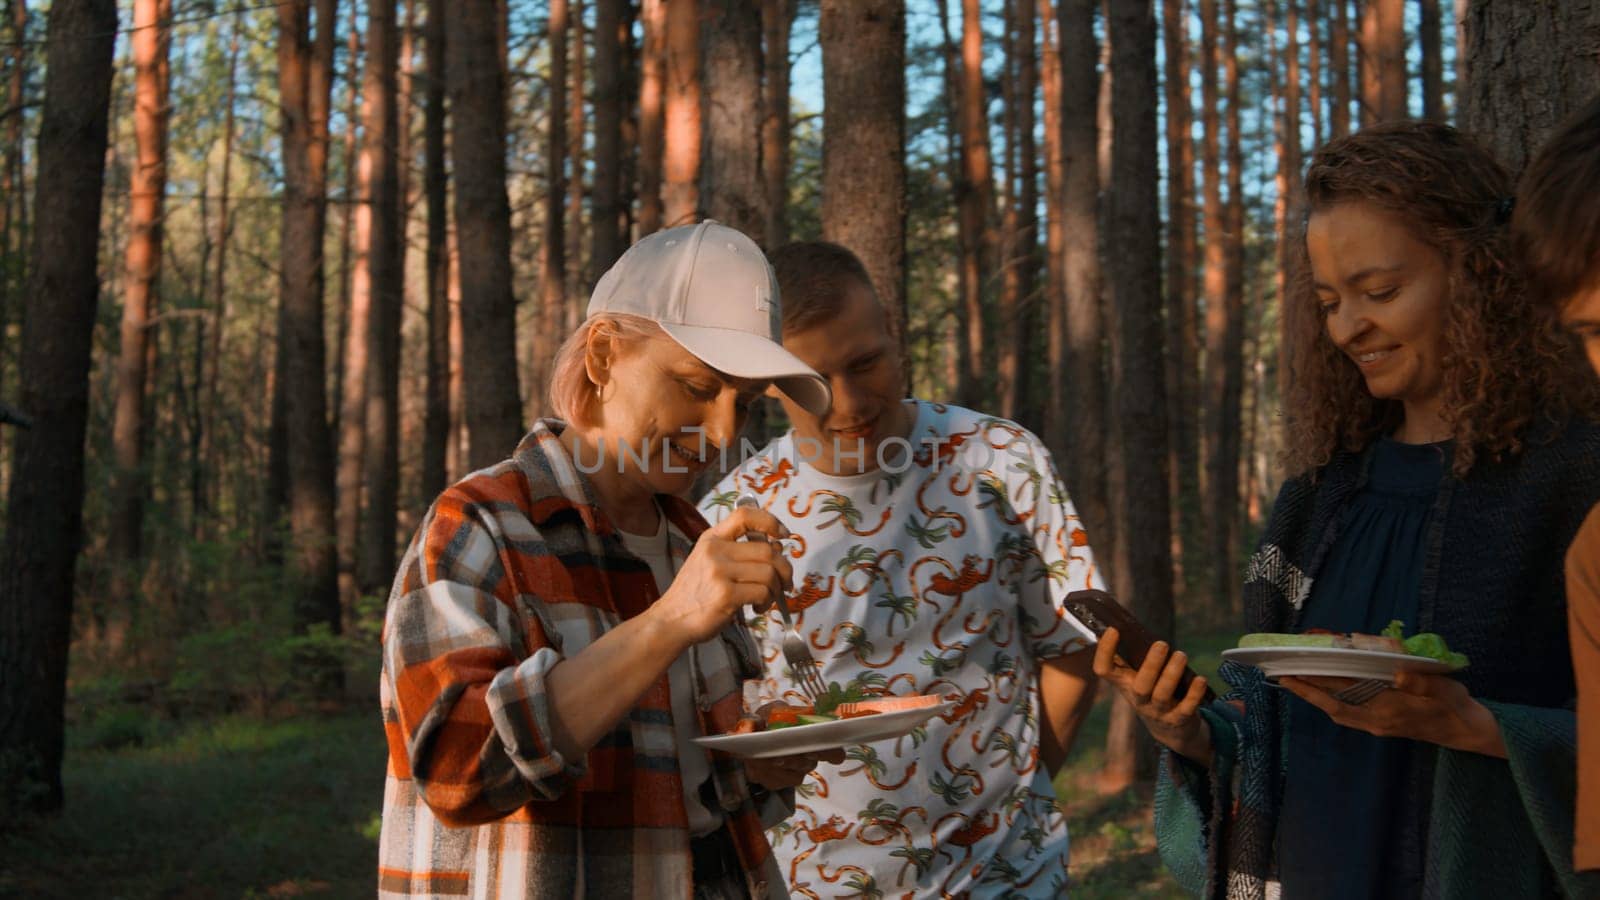 Adult group of friends camping and having a barbecue. Stock footage. Spending time outdoors in summer forest